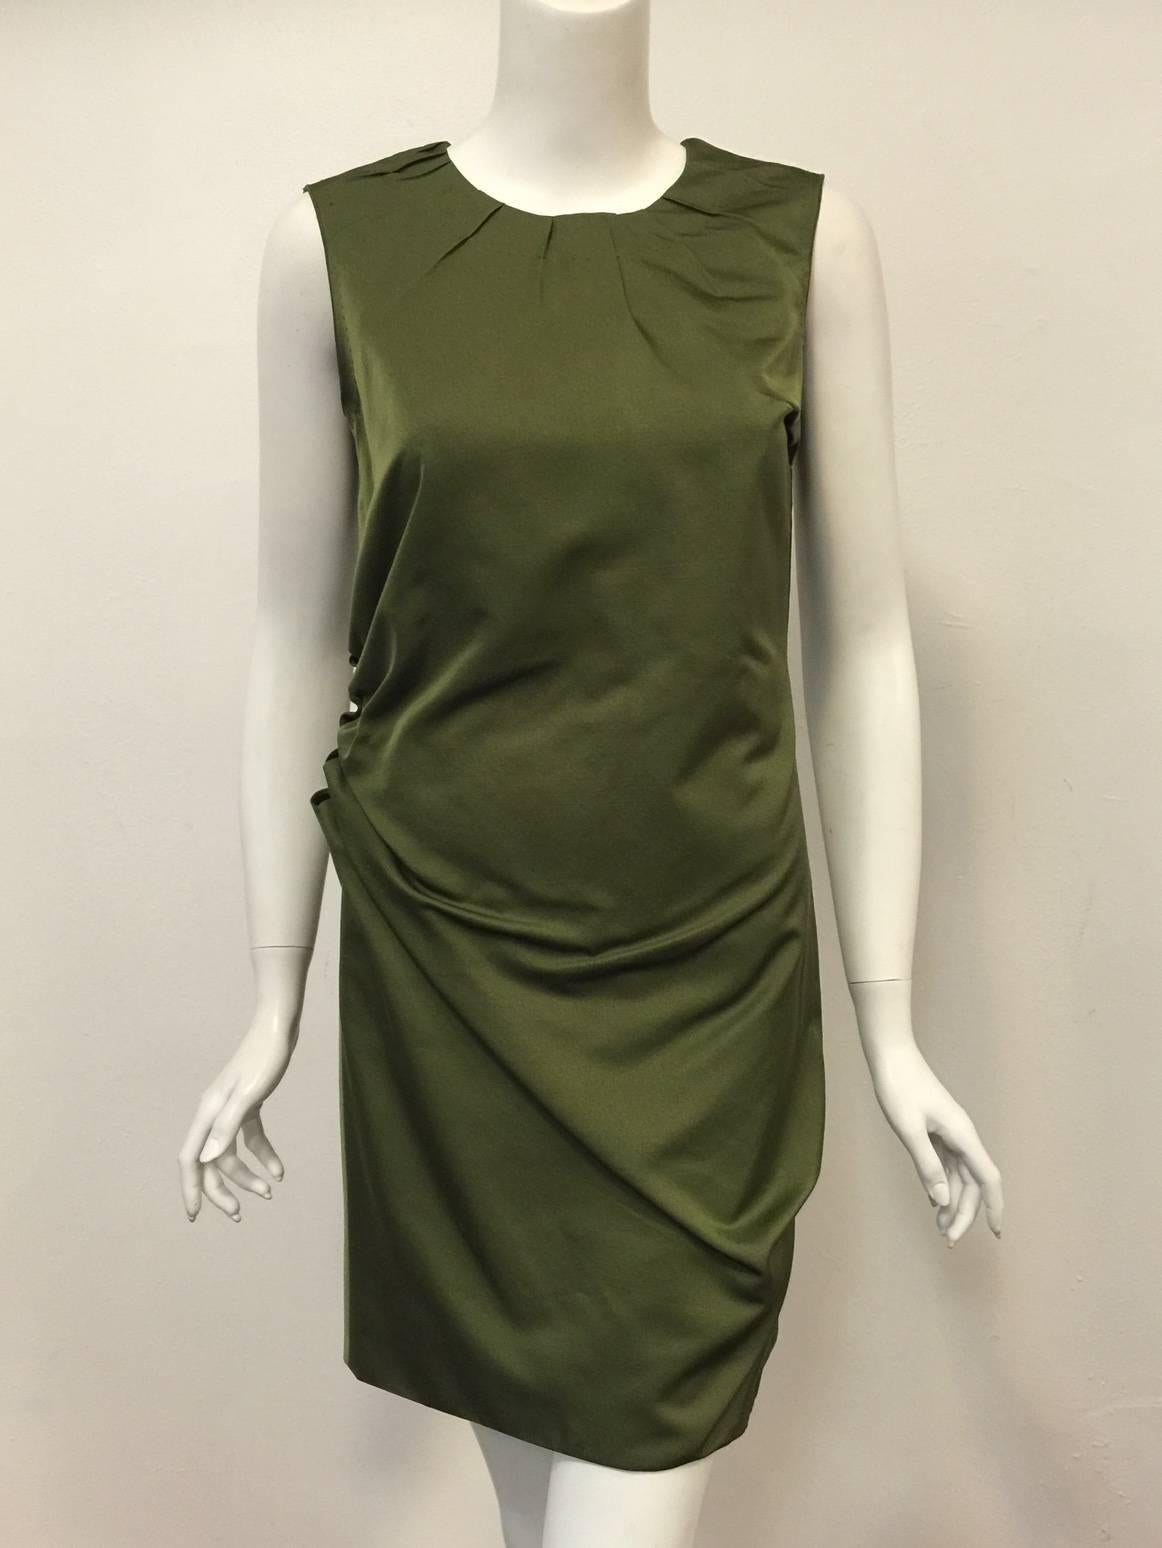 Marc Jacobs Sleeveless Sheath illustrates his extensive previous experience as head designer for Louis Vuitton.  Features a classic silhouette rendered in olive wool and silk.  Worthy of Bergdorf Goodman, dress has round neckline with pintuck